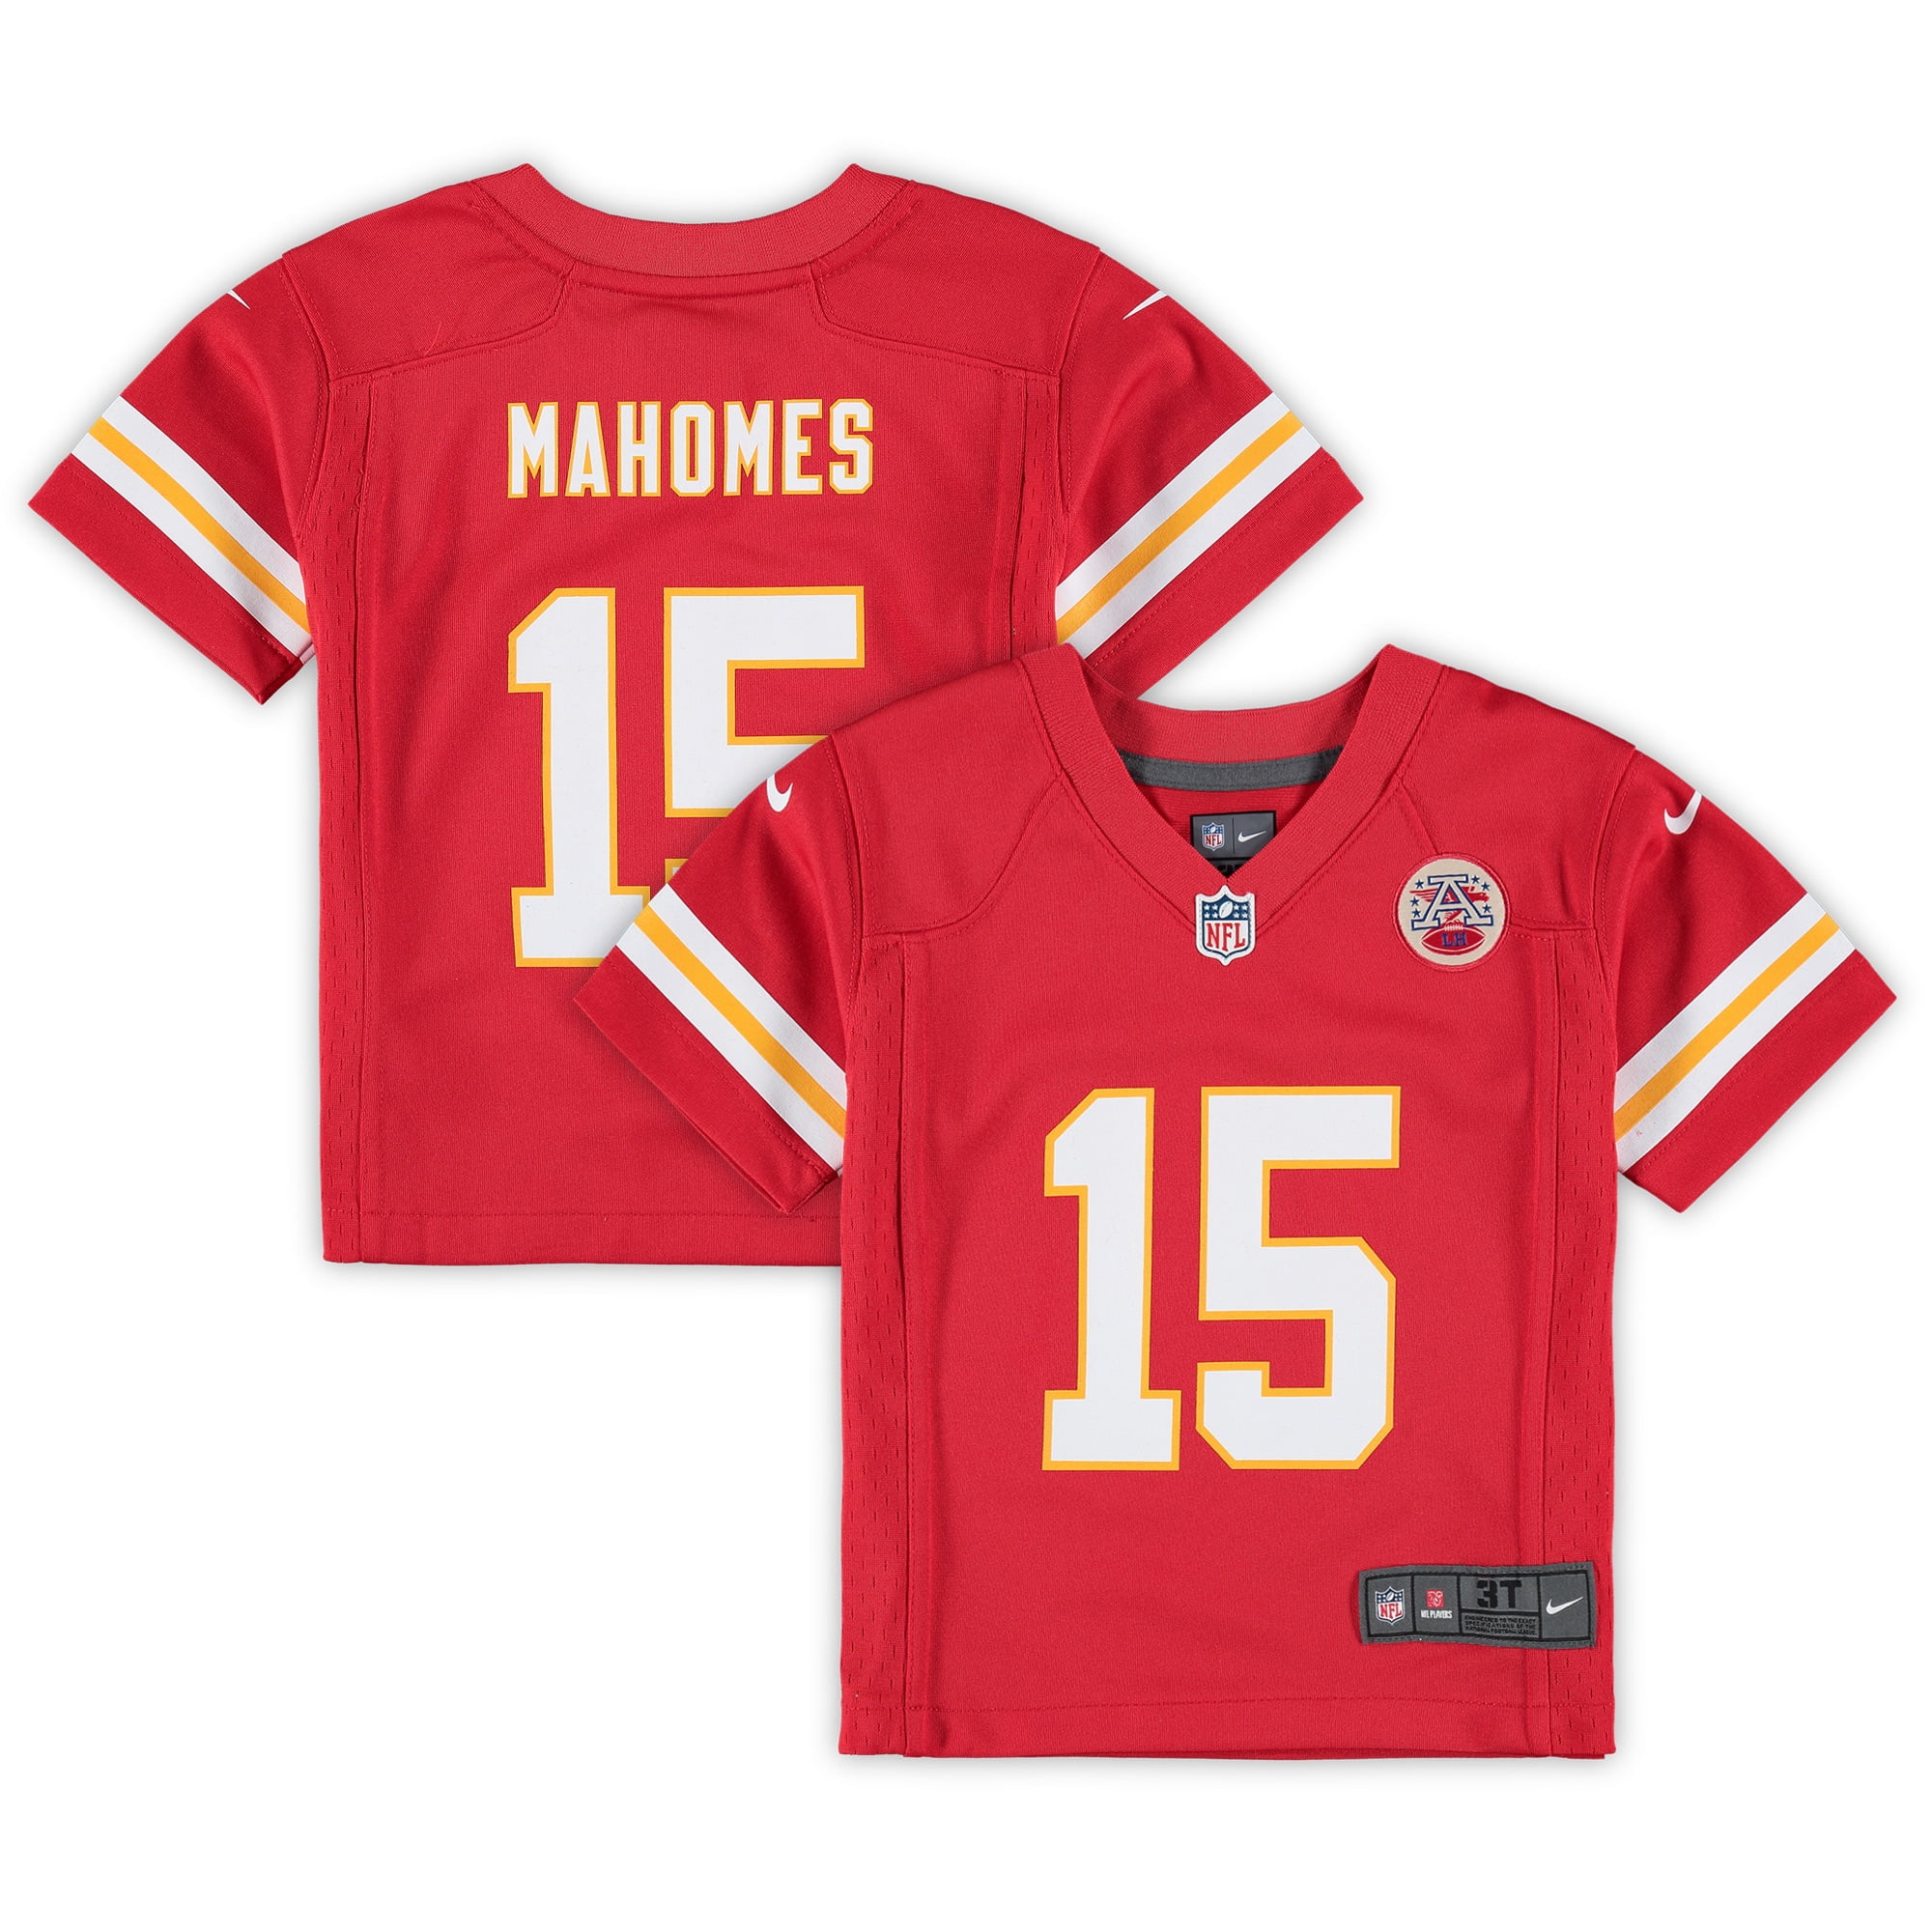 patrick mahomes game used jersey